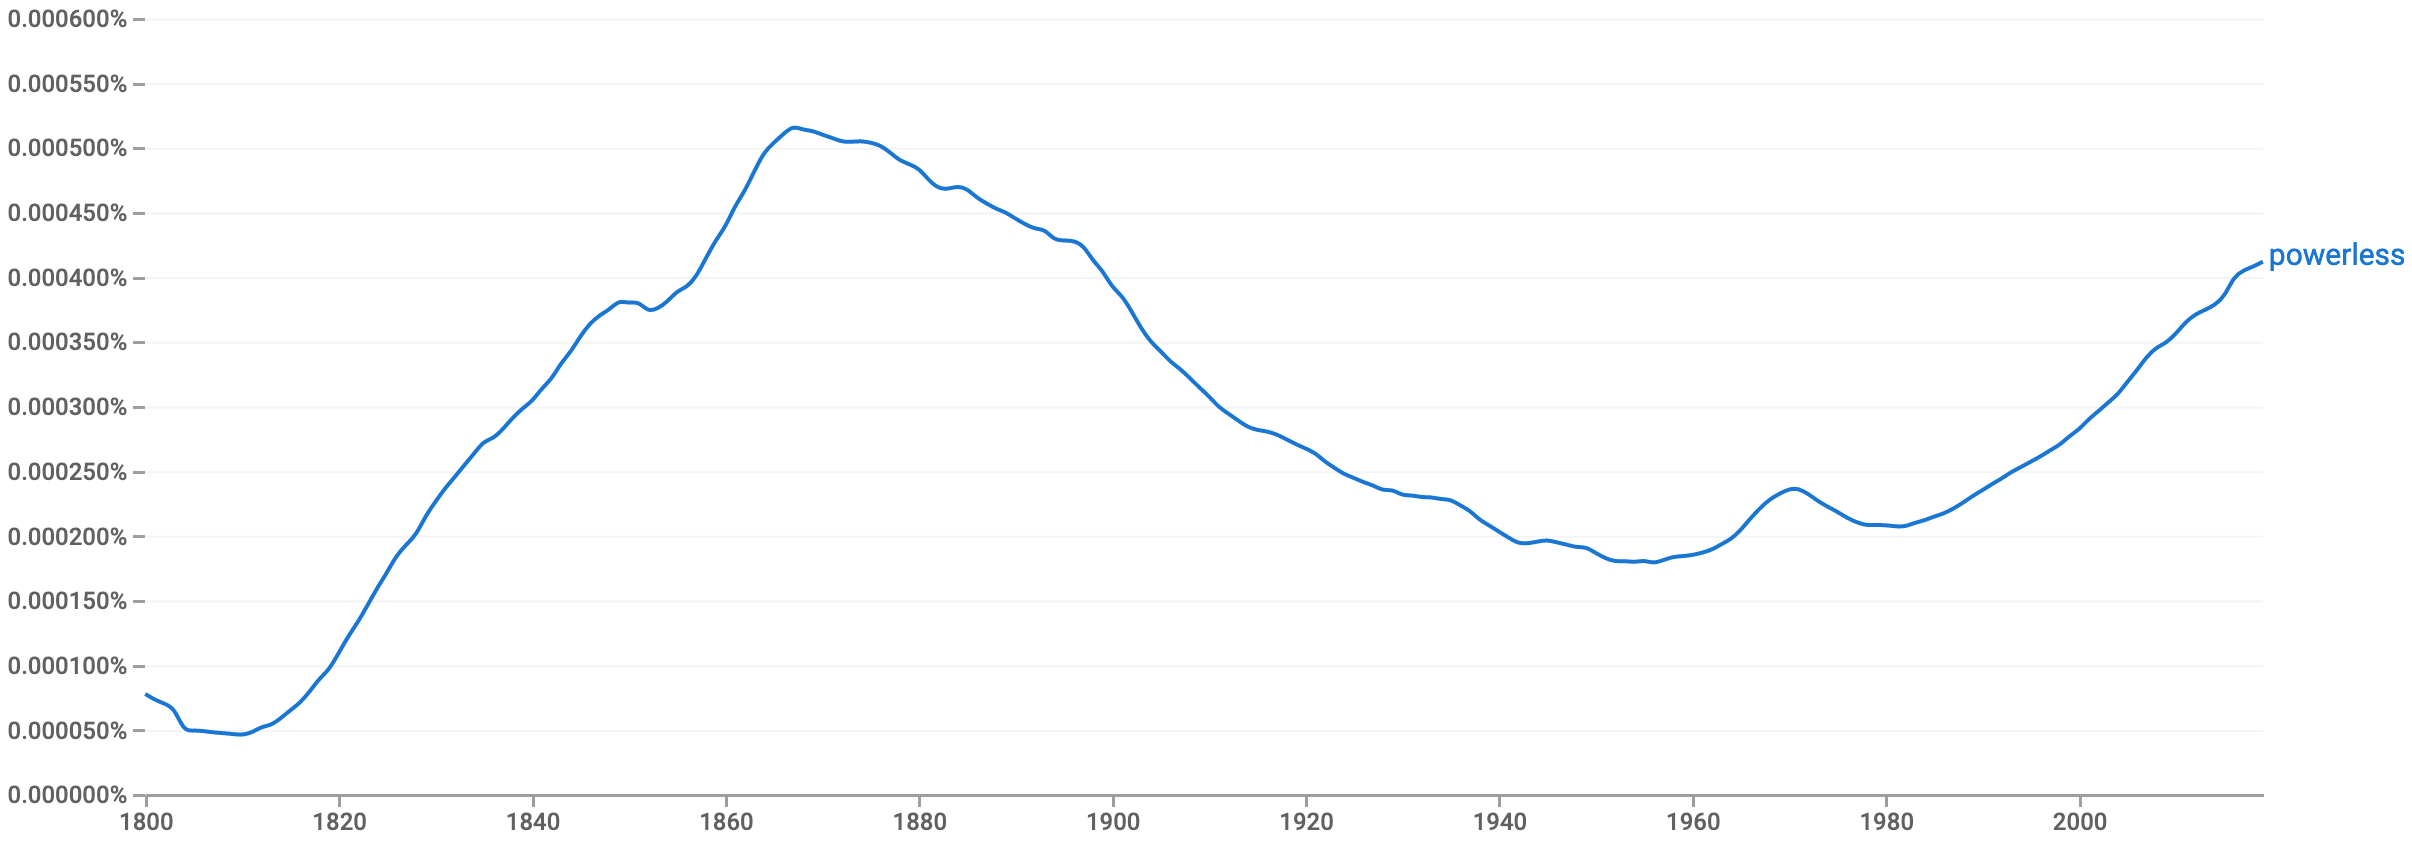 Screenshot of Google Ngram Viewer showing usage over time of the word "powerless".